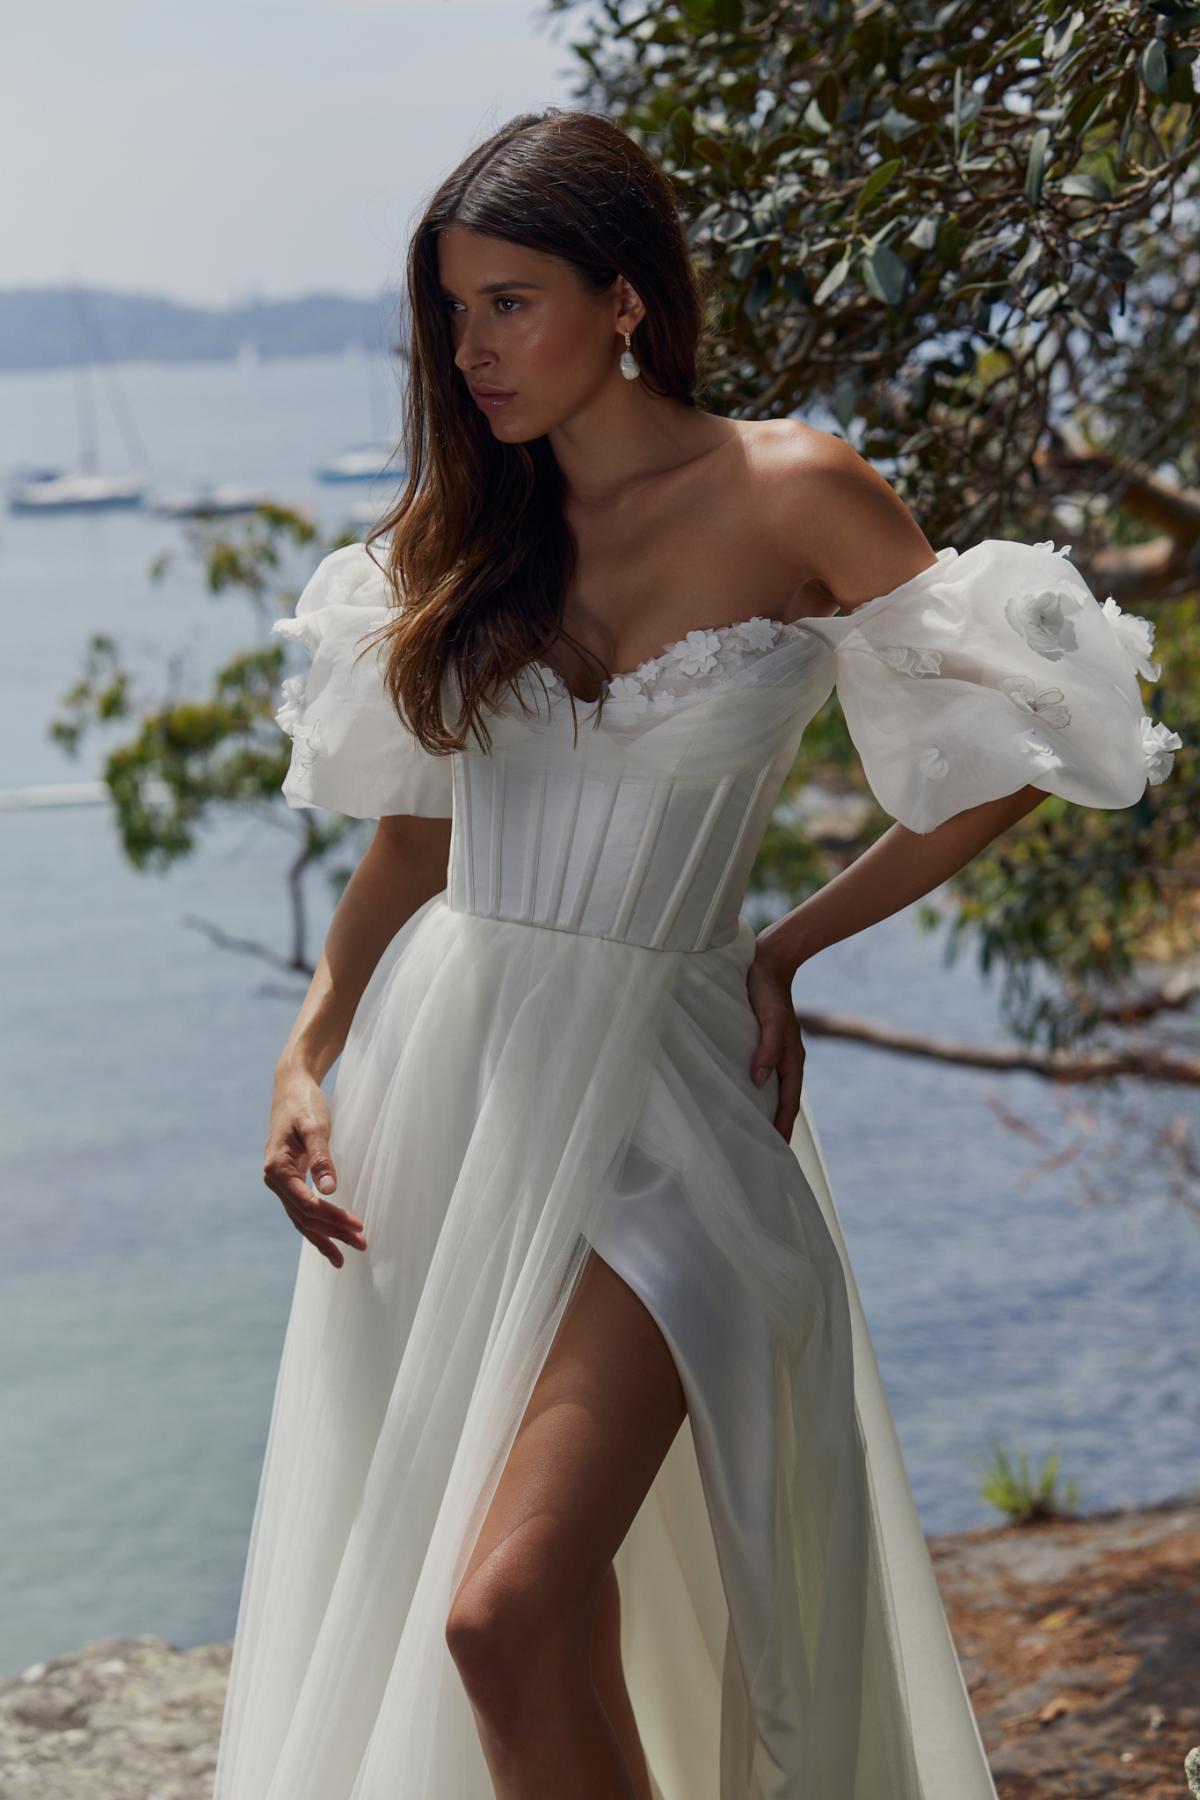 Styled with our Denisa 3D Floral Sleeve, the Rhianna & Jules gown. The Rhianna Bodice features a classic shape and modern floral embroidery. Paired with the Jules Skirt with high statement side-split in a soft tulle fabric.